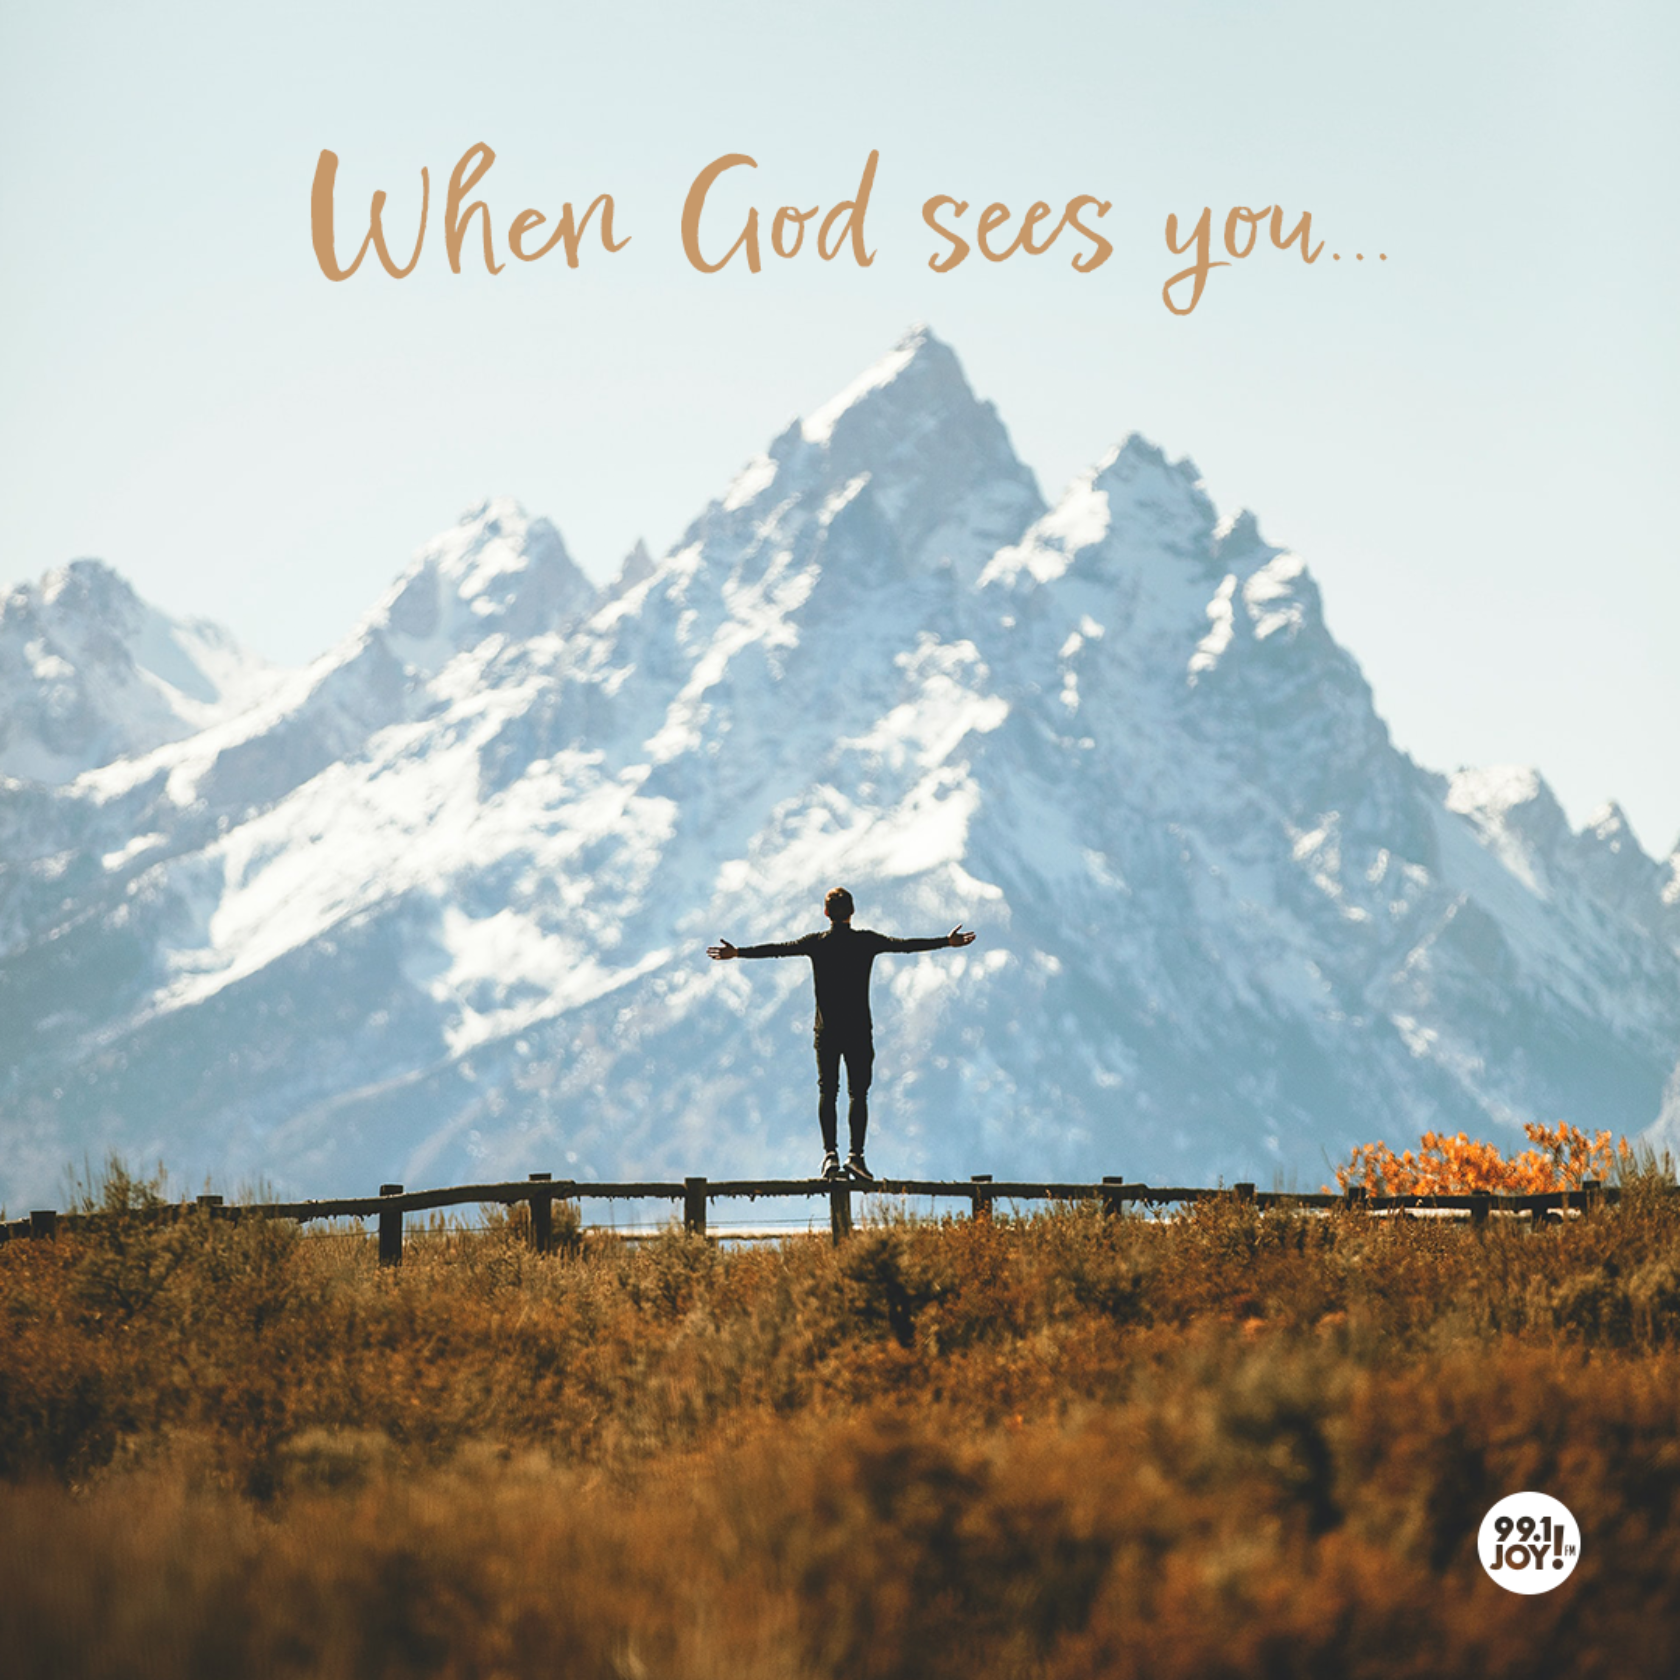 When God Sees You...